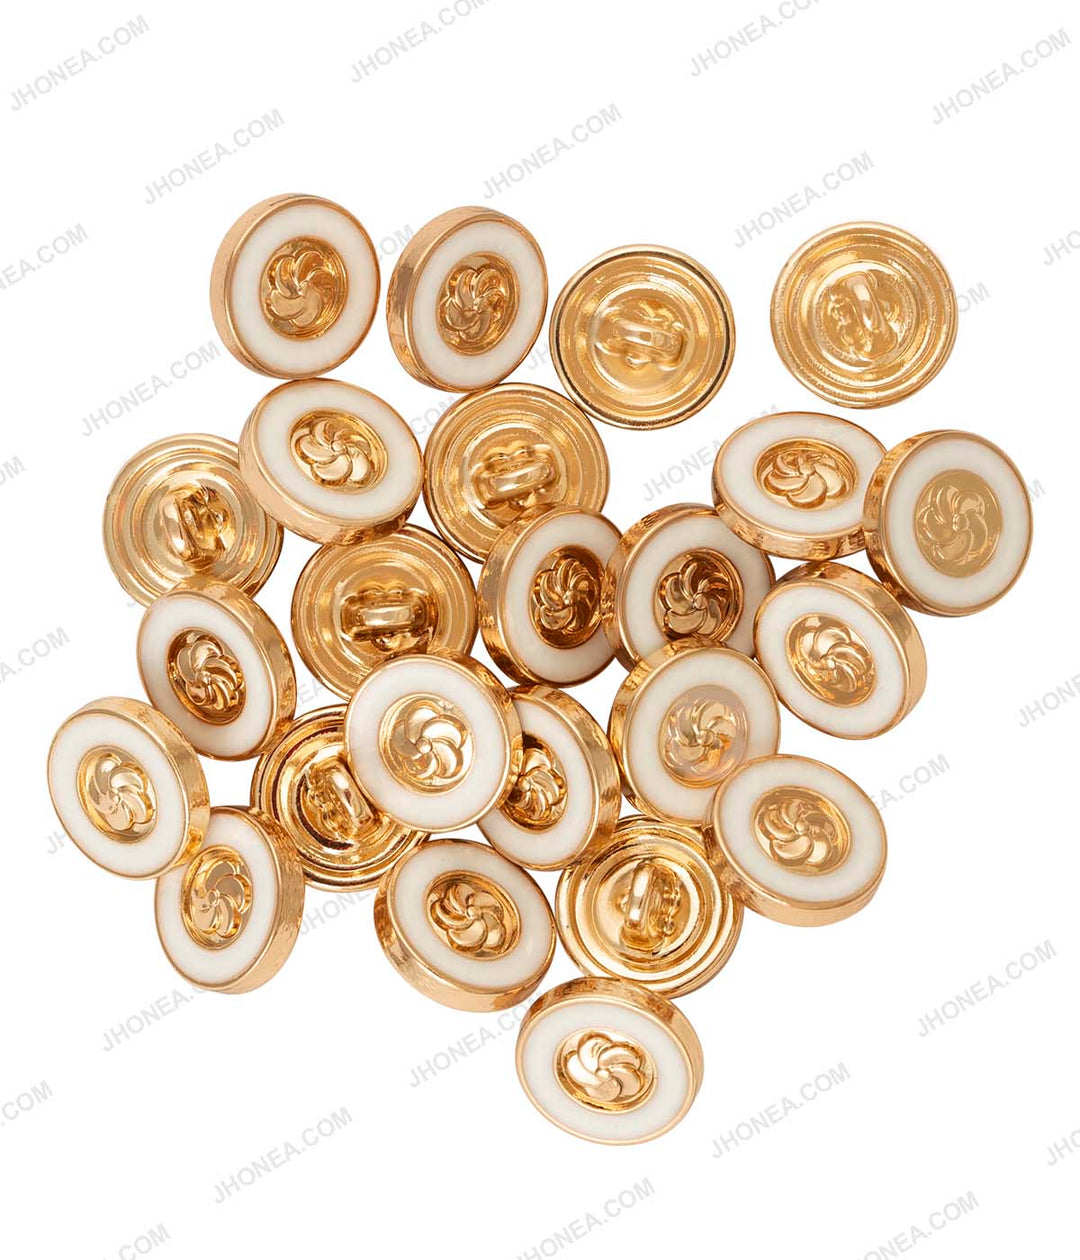 Shiny Embossed Flower Enamel Rim Border 10mm Shiny Gold with White Color Shirt Buttons